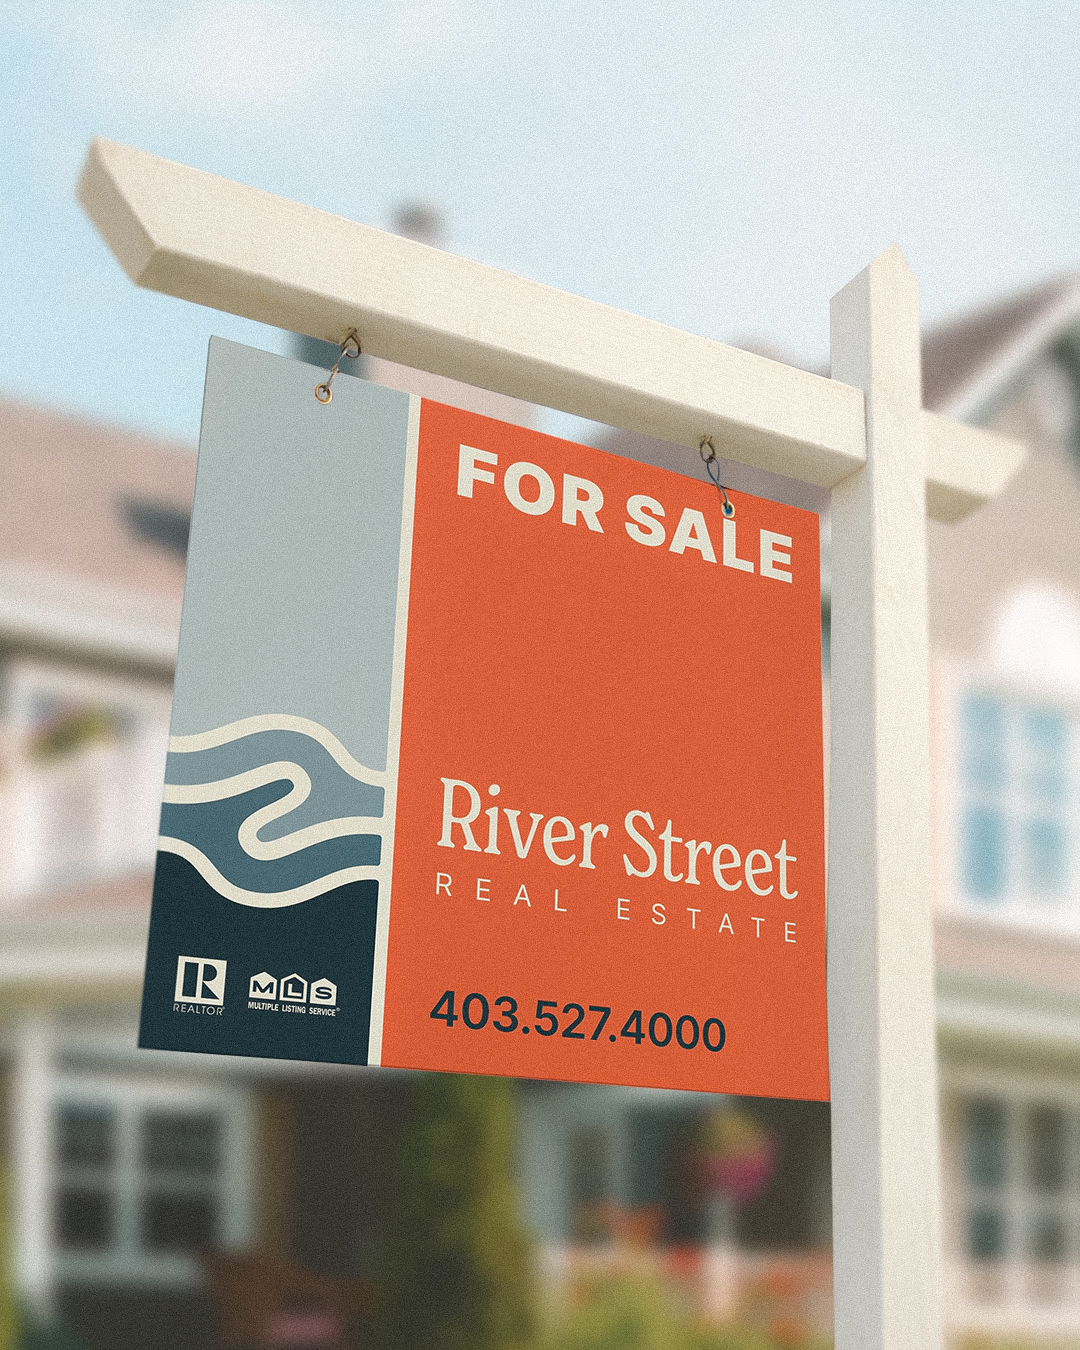 River Street Real Estate For Sale Lawn Sign